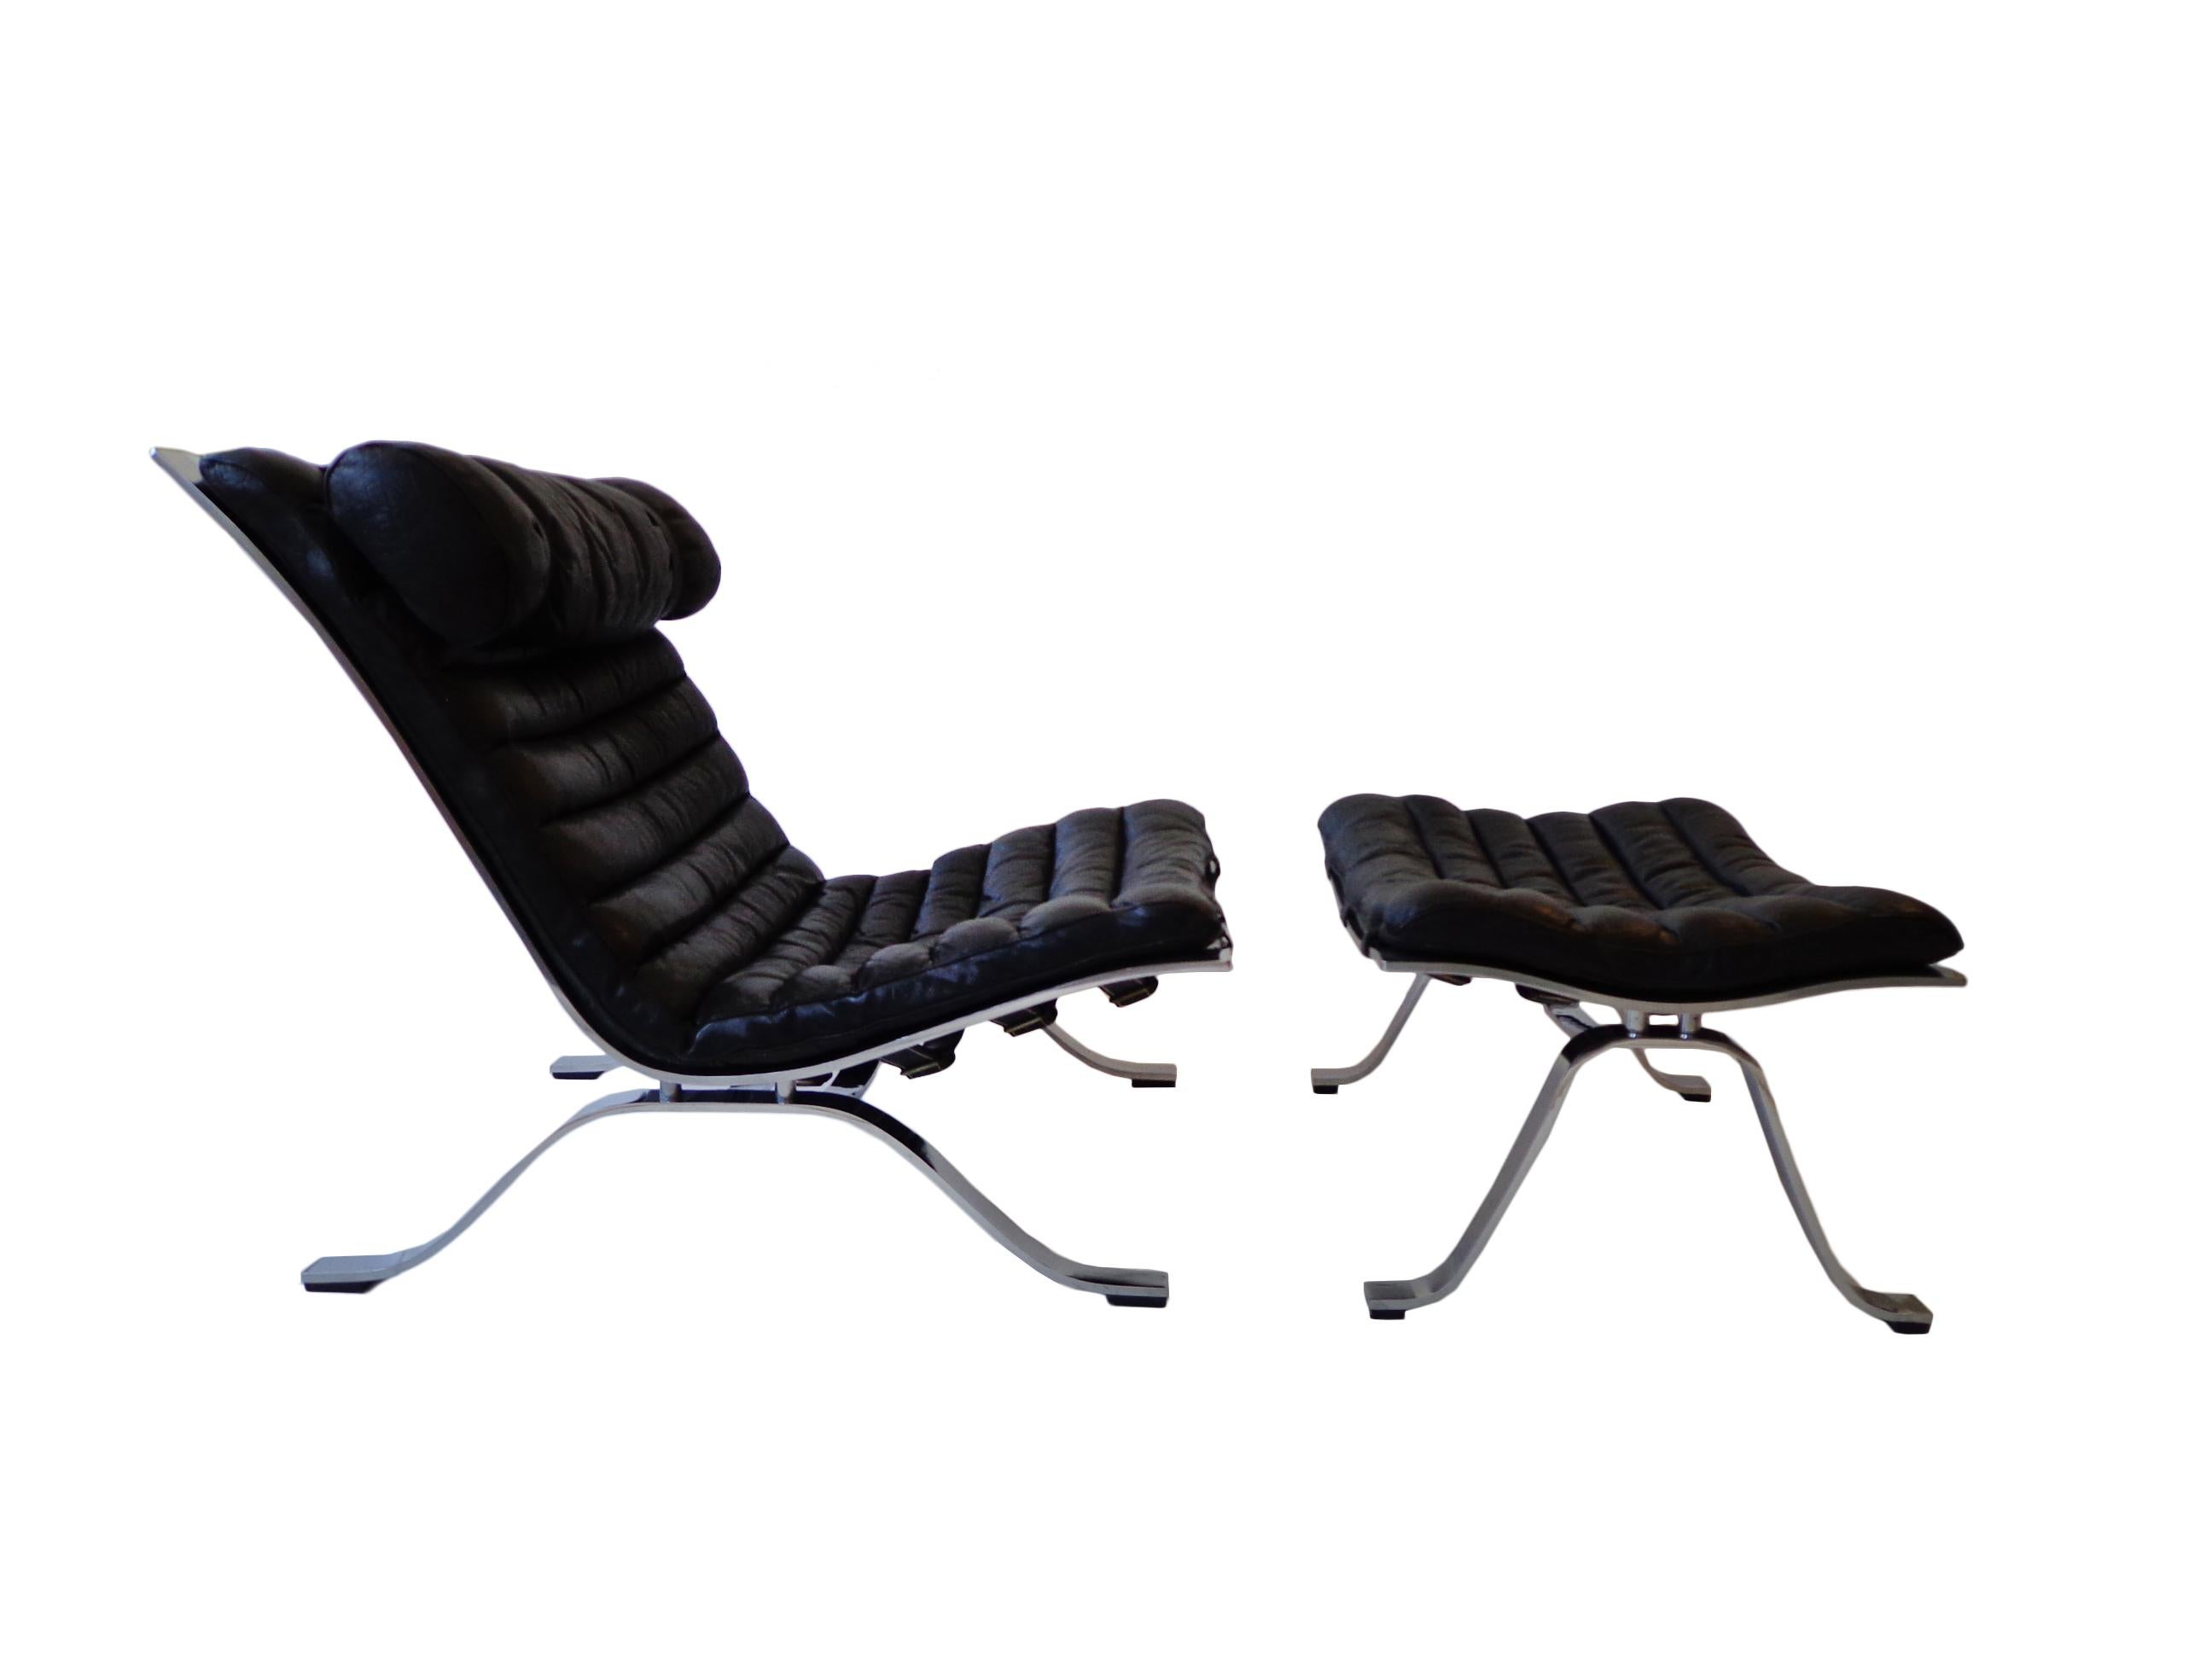 Comfortable lounge chair and ottoman designed by Arne Norell. This award winning lounge chair is made of high quality matt polished steel and original black leather. The set is in nice vintage condition with fantastic patina from age and